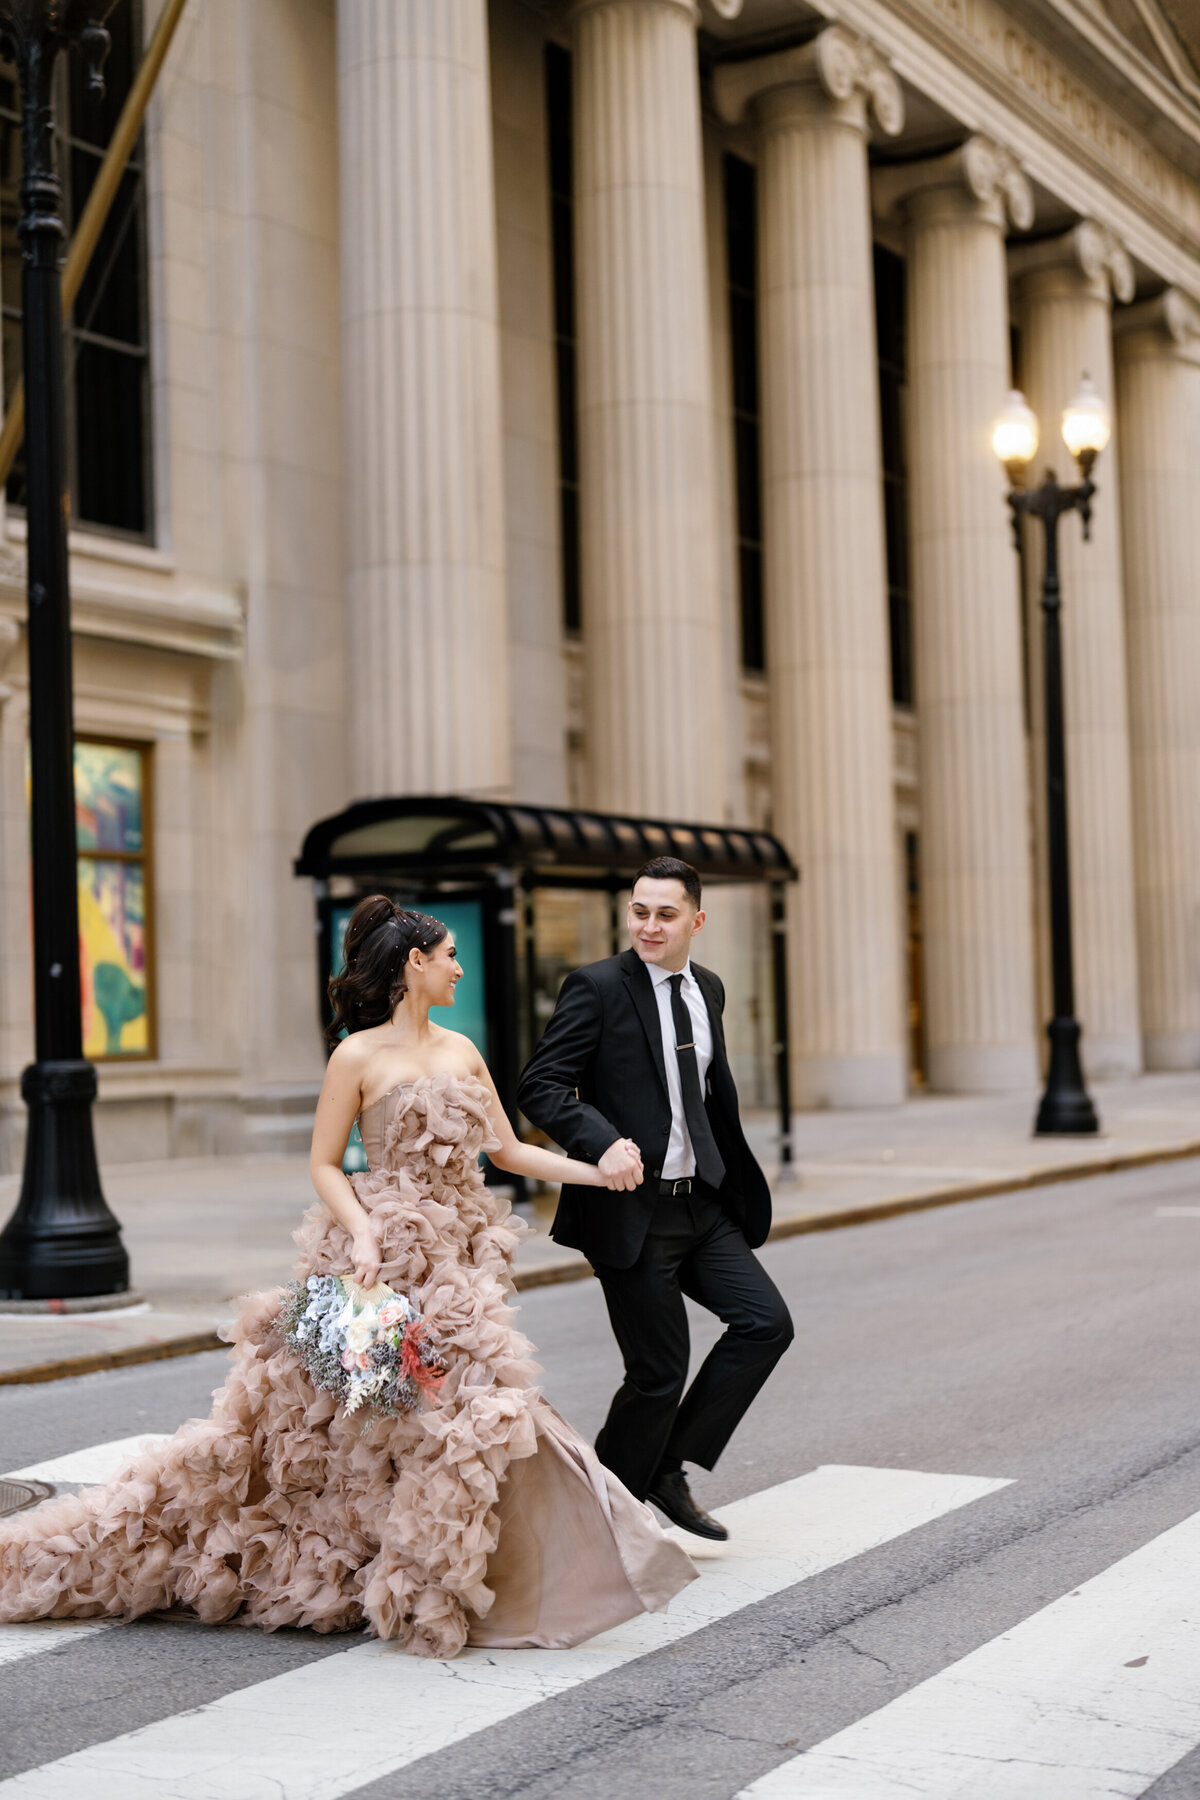 Aspen-Avenue-Chicago-Wedding-Photographer-Rookery-Engagement-Session-Histoircal-Stairs-Moody-Dramatic-Magazine-Unique-Gown-Stemming-From-Love-Emily-Rae-Bridal-Hair-FAV-51